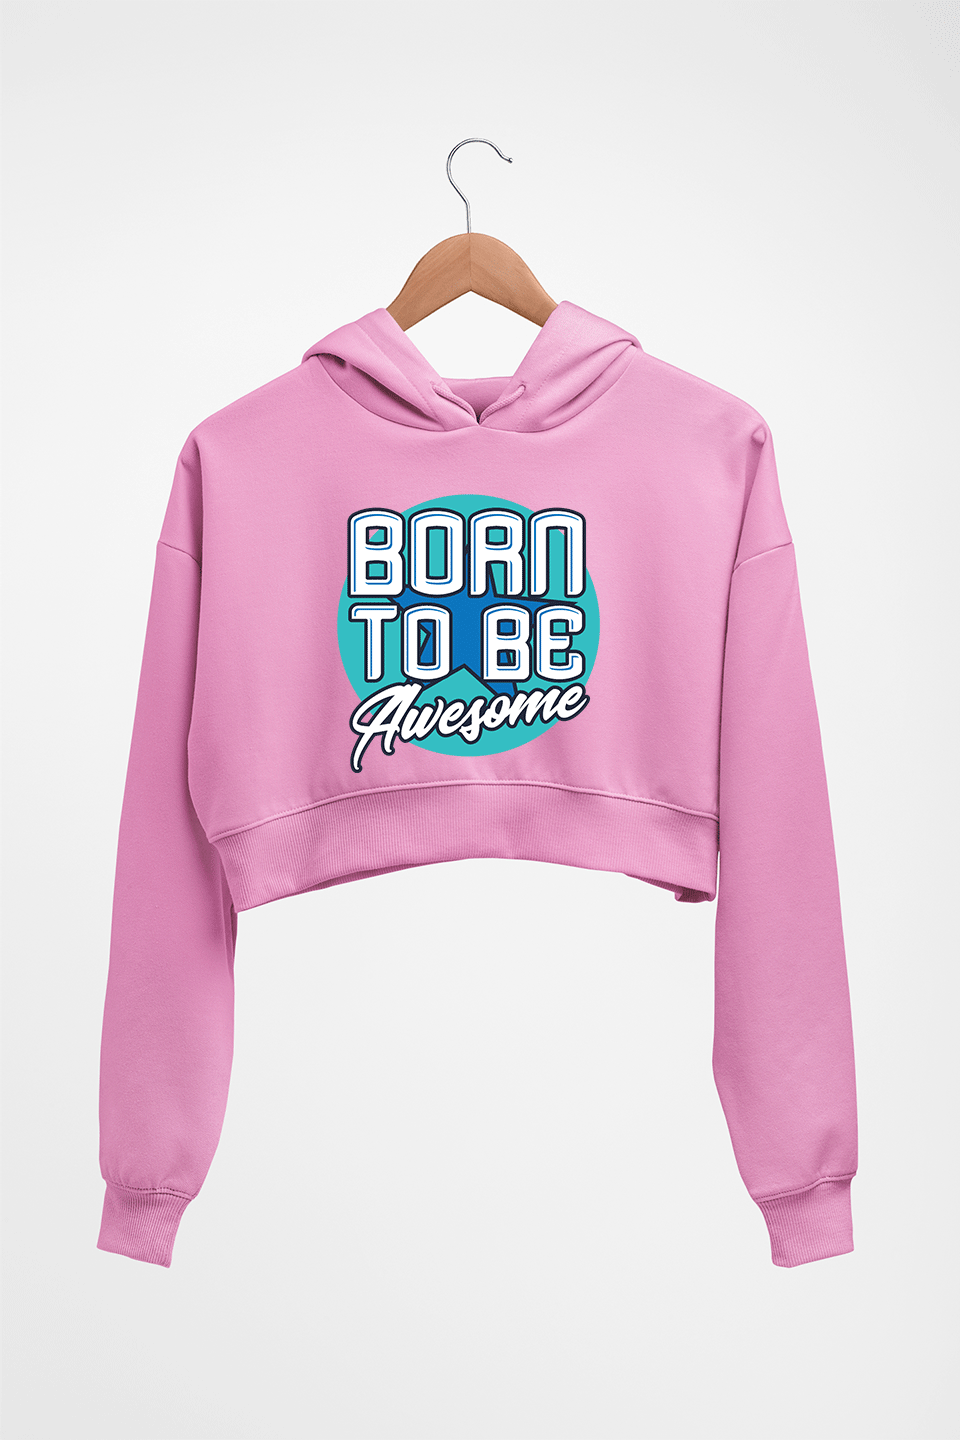 Born To be Awesome Crop HOODIE FOR WOMEN